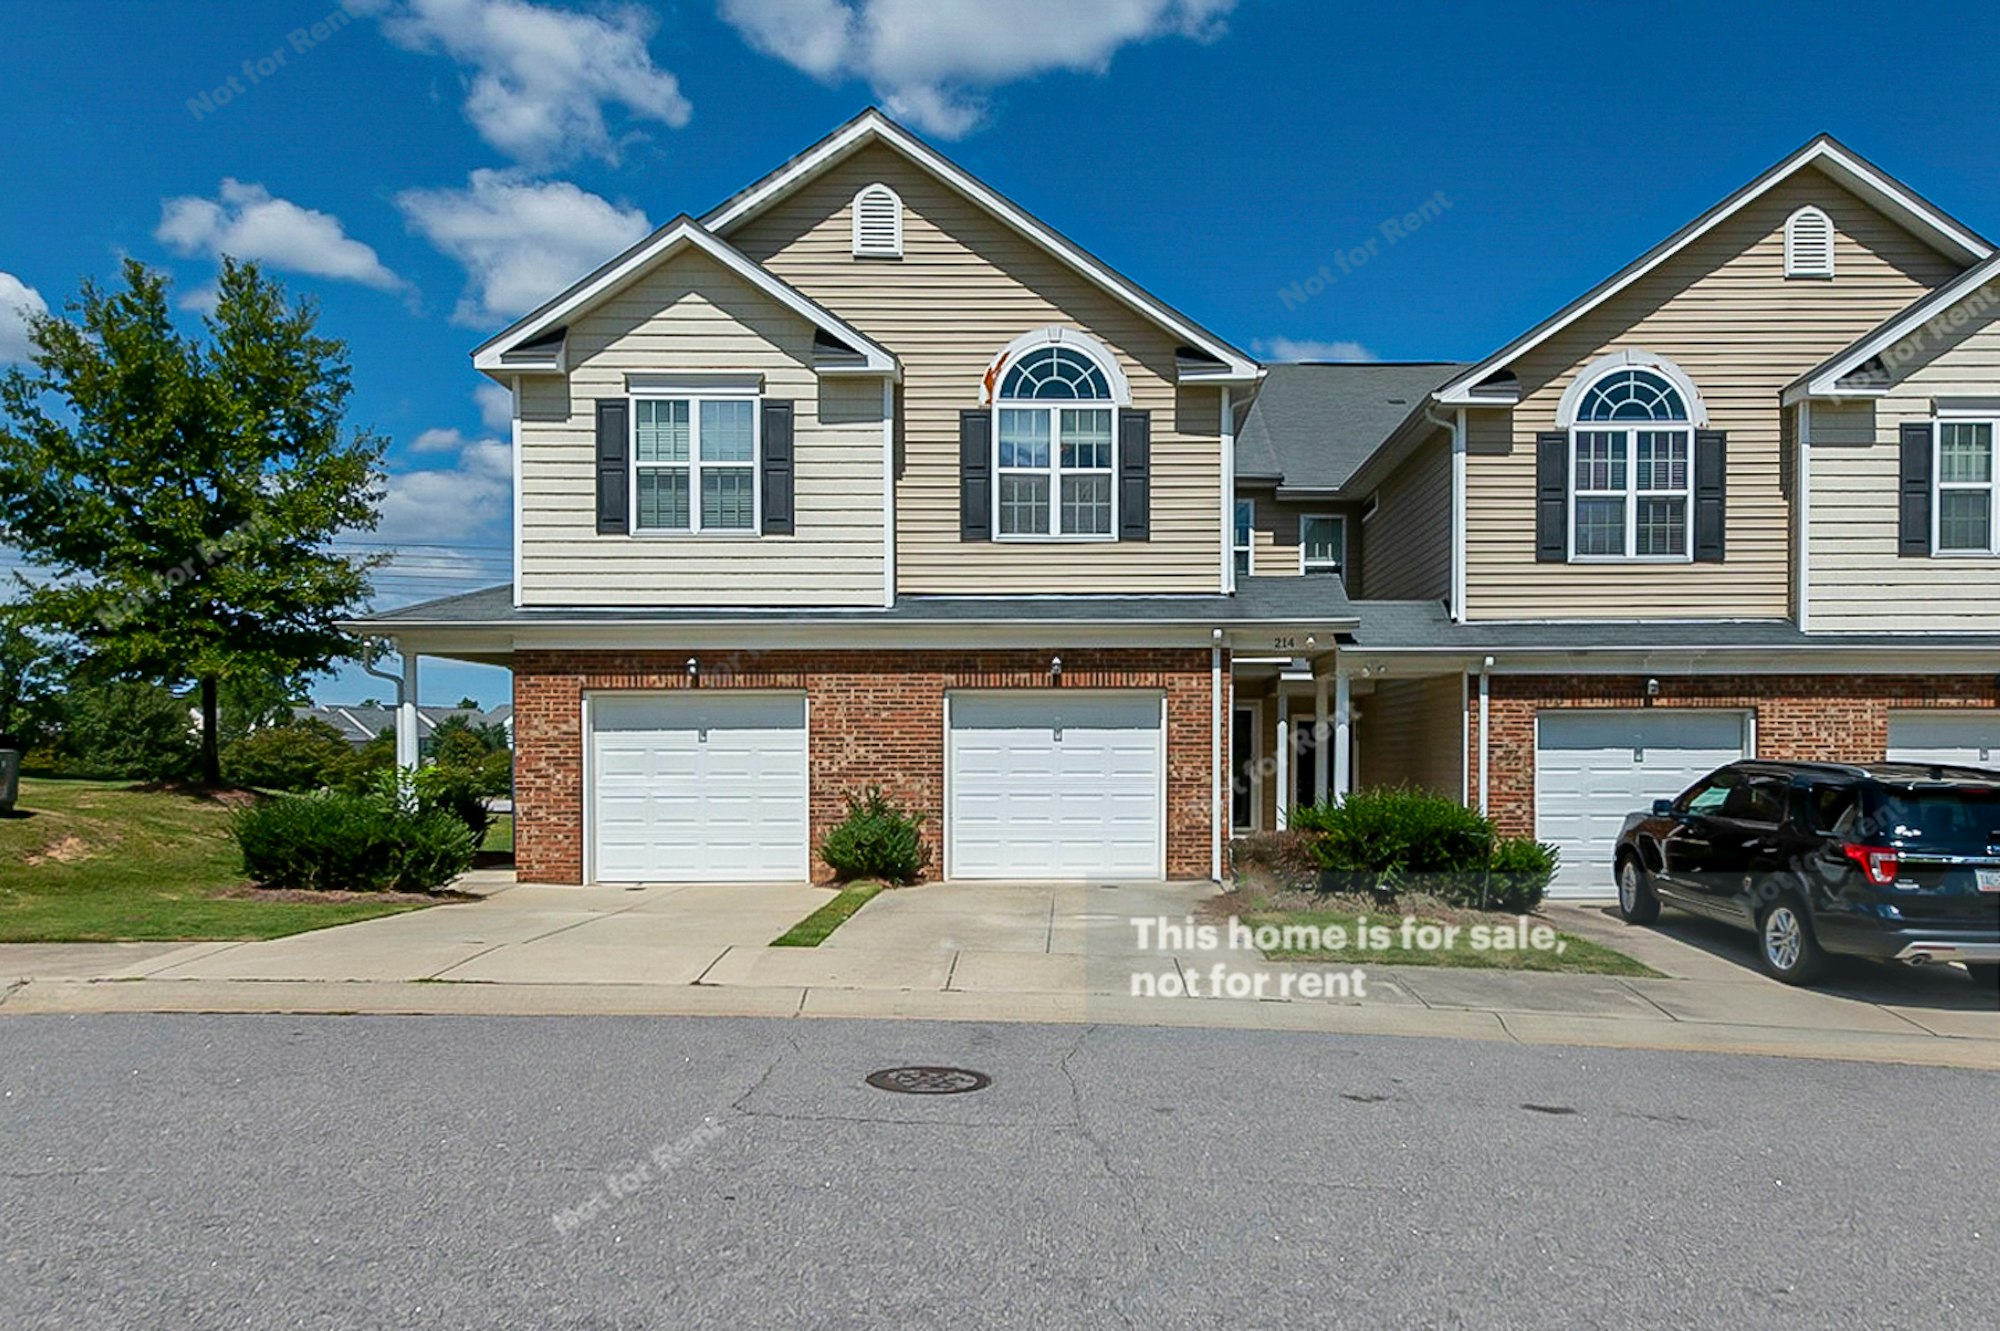 Photo 1 of 20 - 214 Montview Way, Knightdale, NC 27545